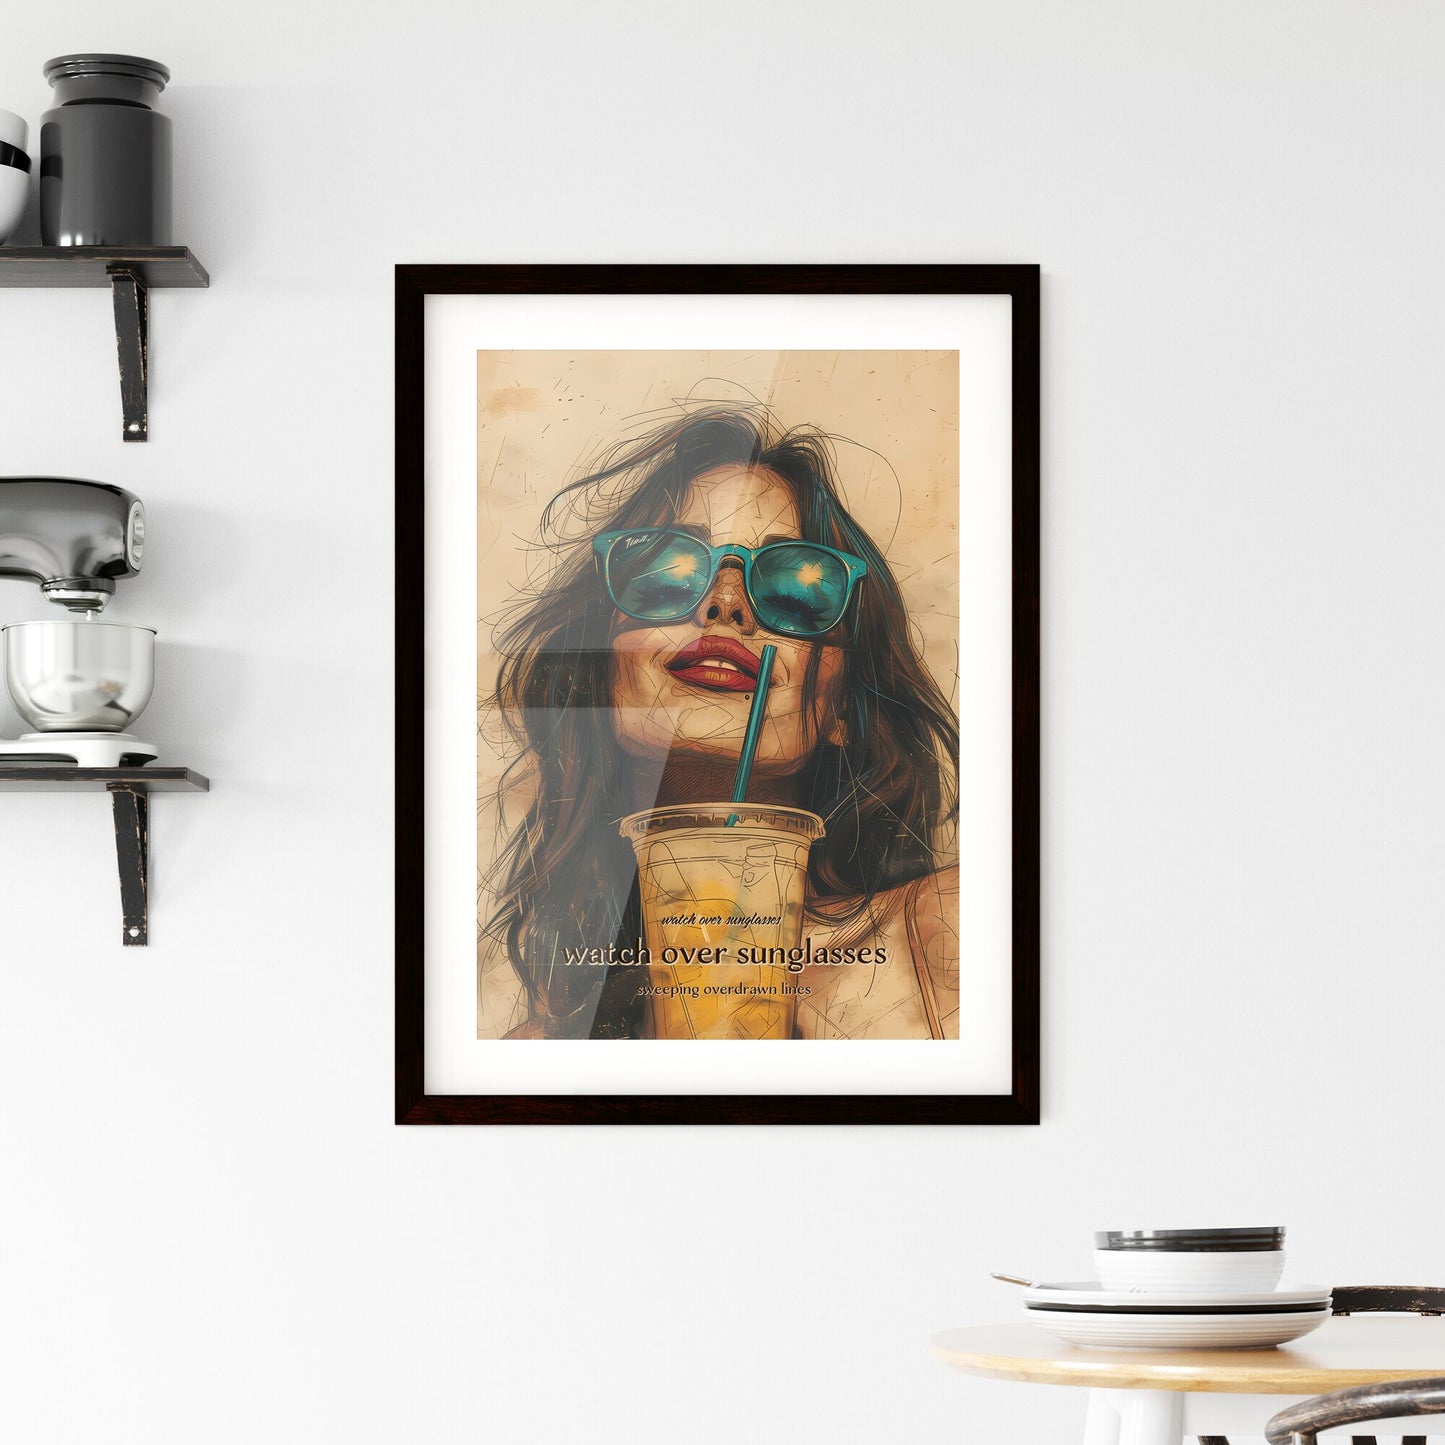 watch over sunglasses, watch over sunglasses, sweeping overdrawn lines, A Poster of a woman wearing sunglasses and drinking from a plastic cup Default Title